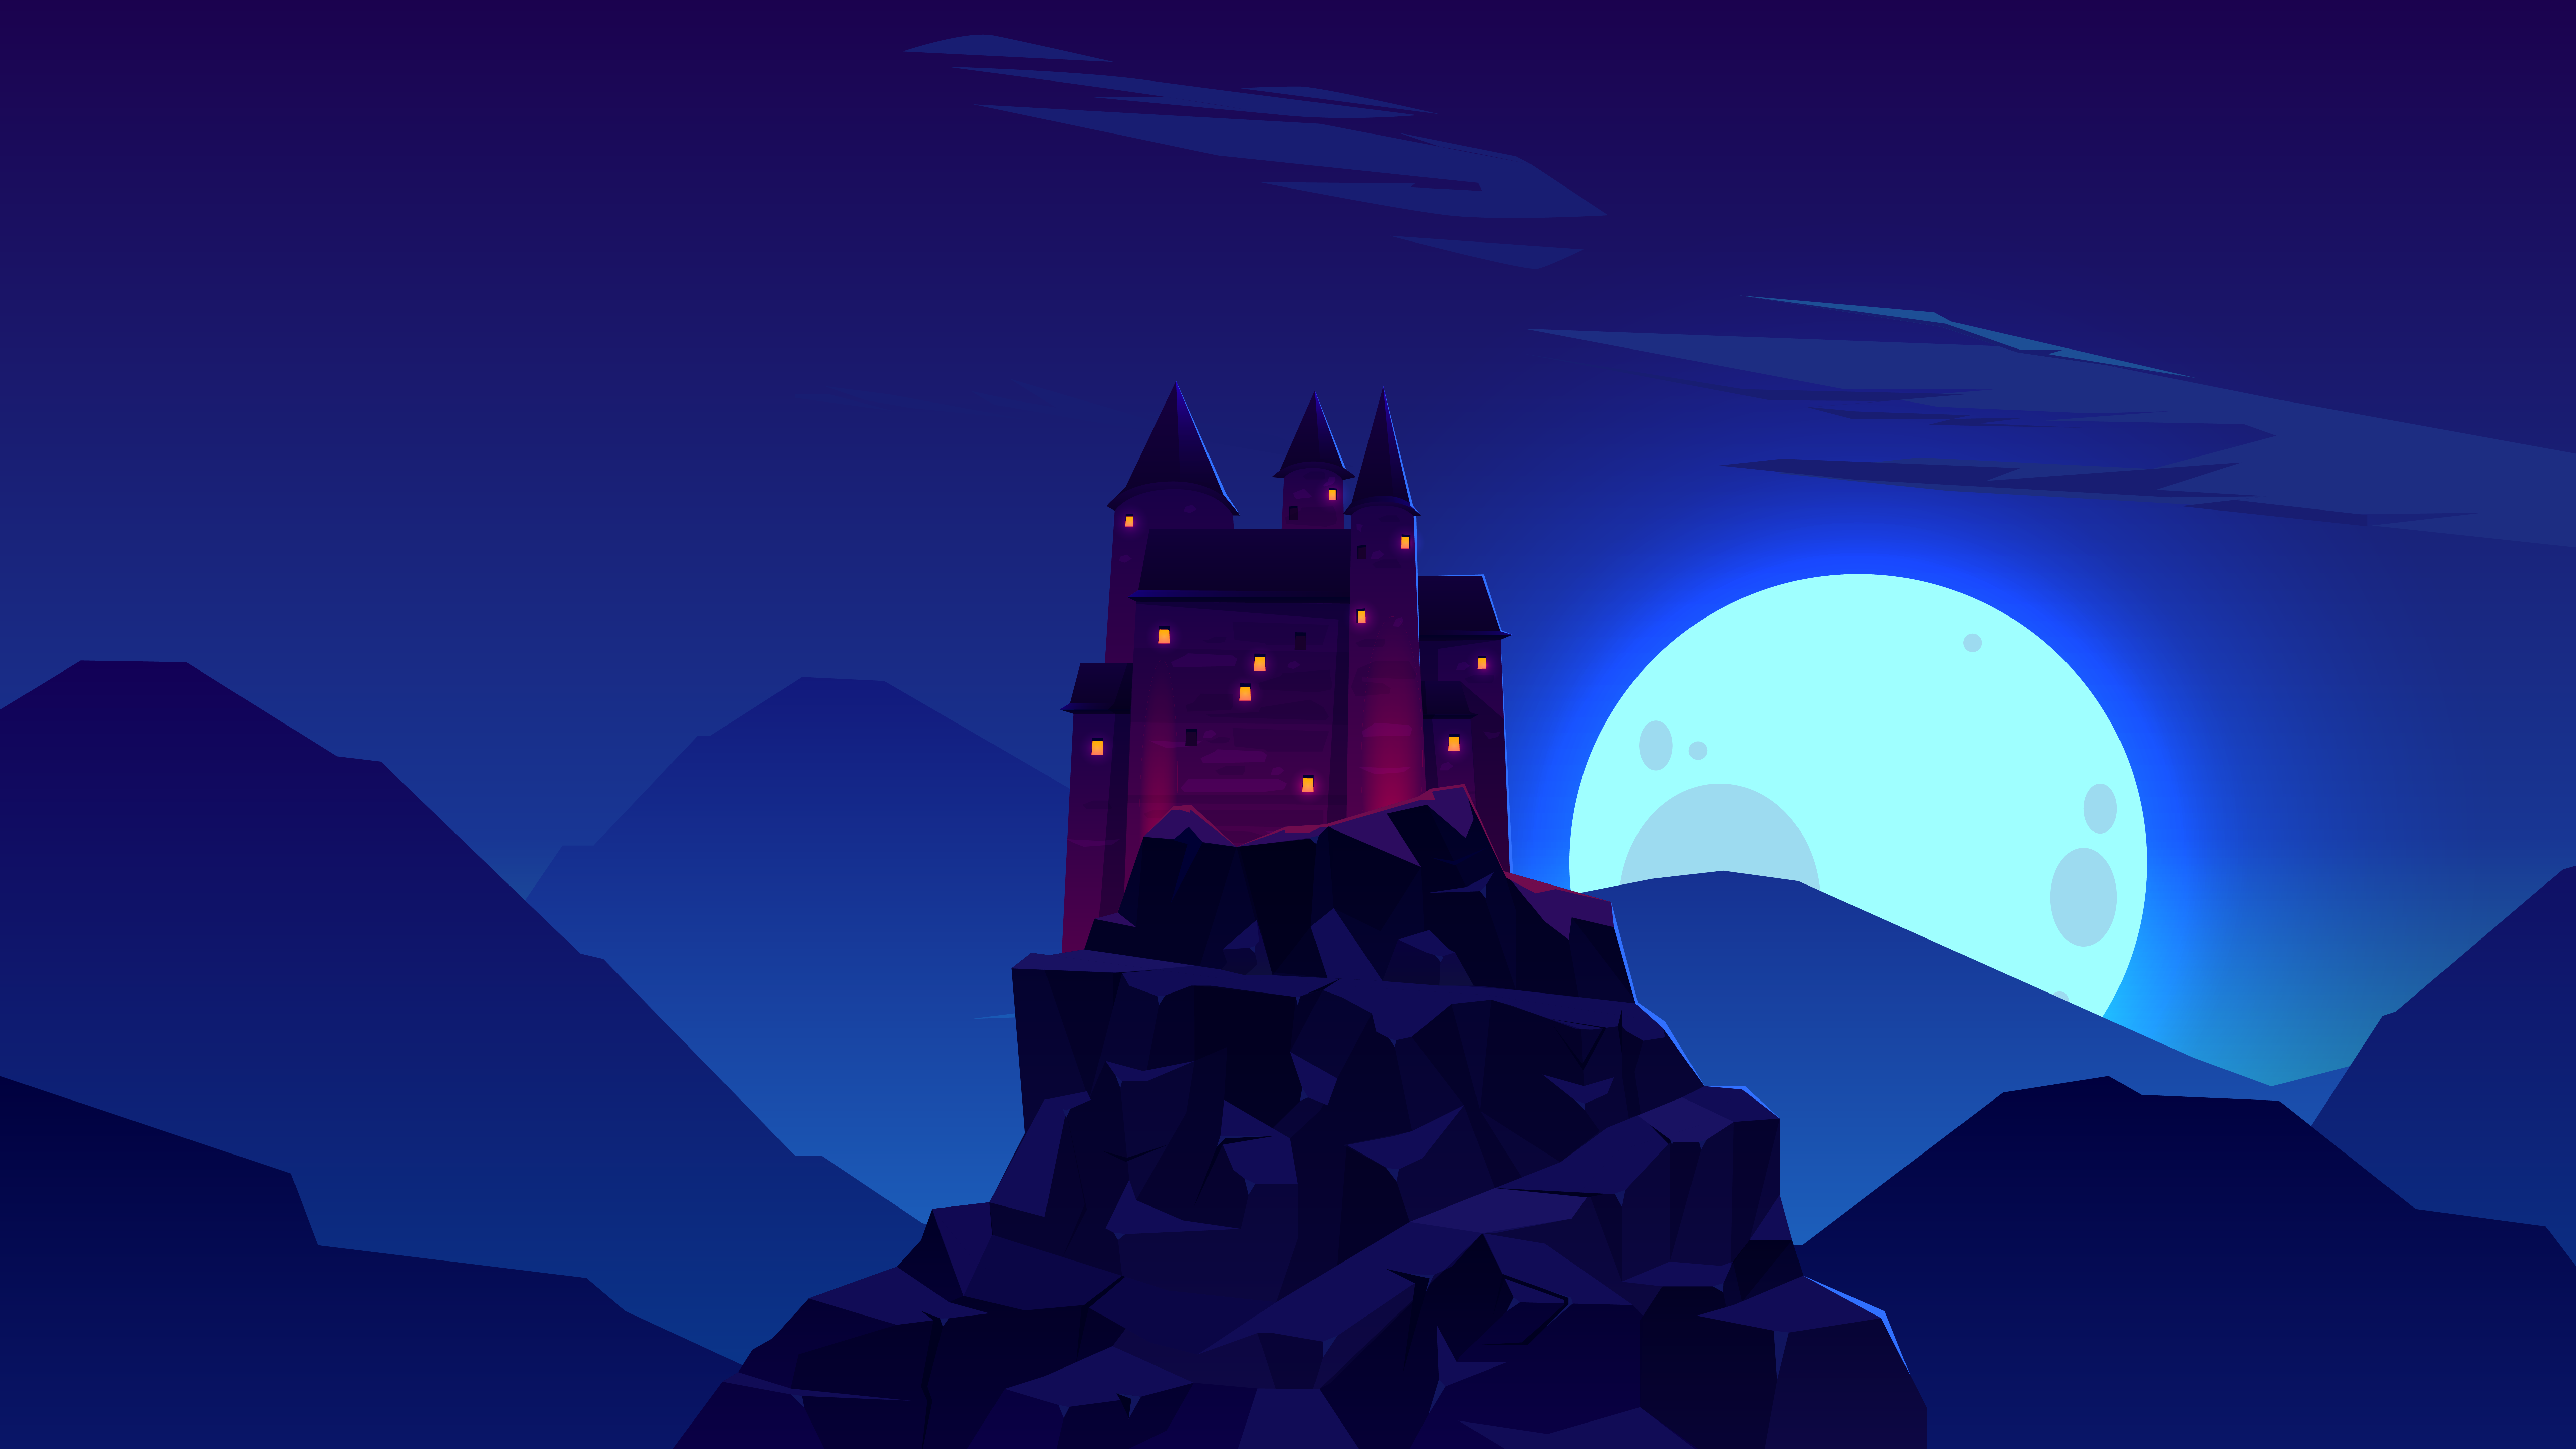 Castle 4K wallpaper for your desktop or mobile screen free and easy to download